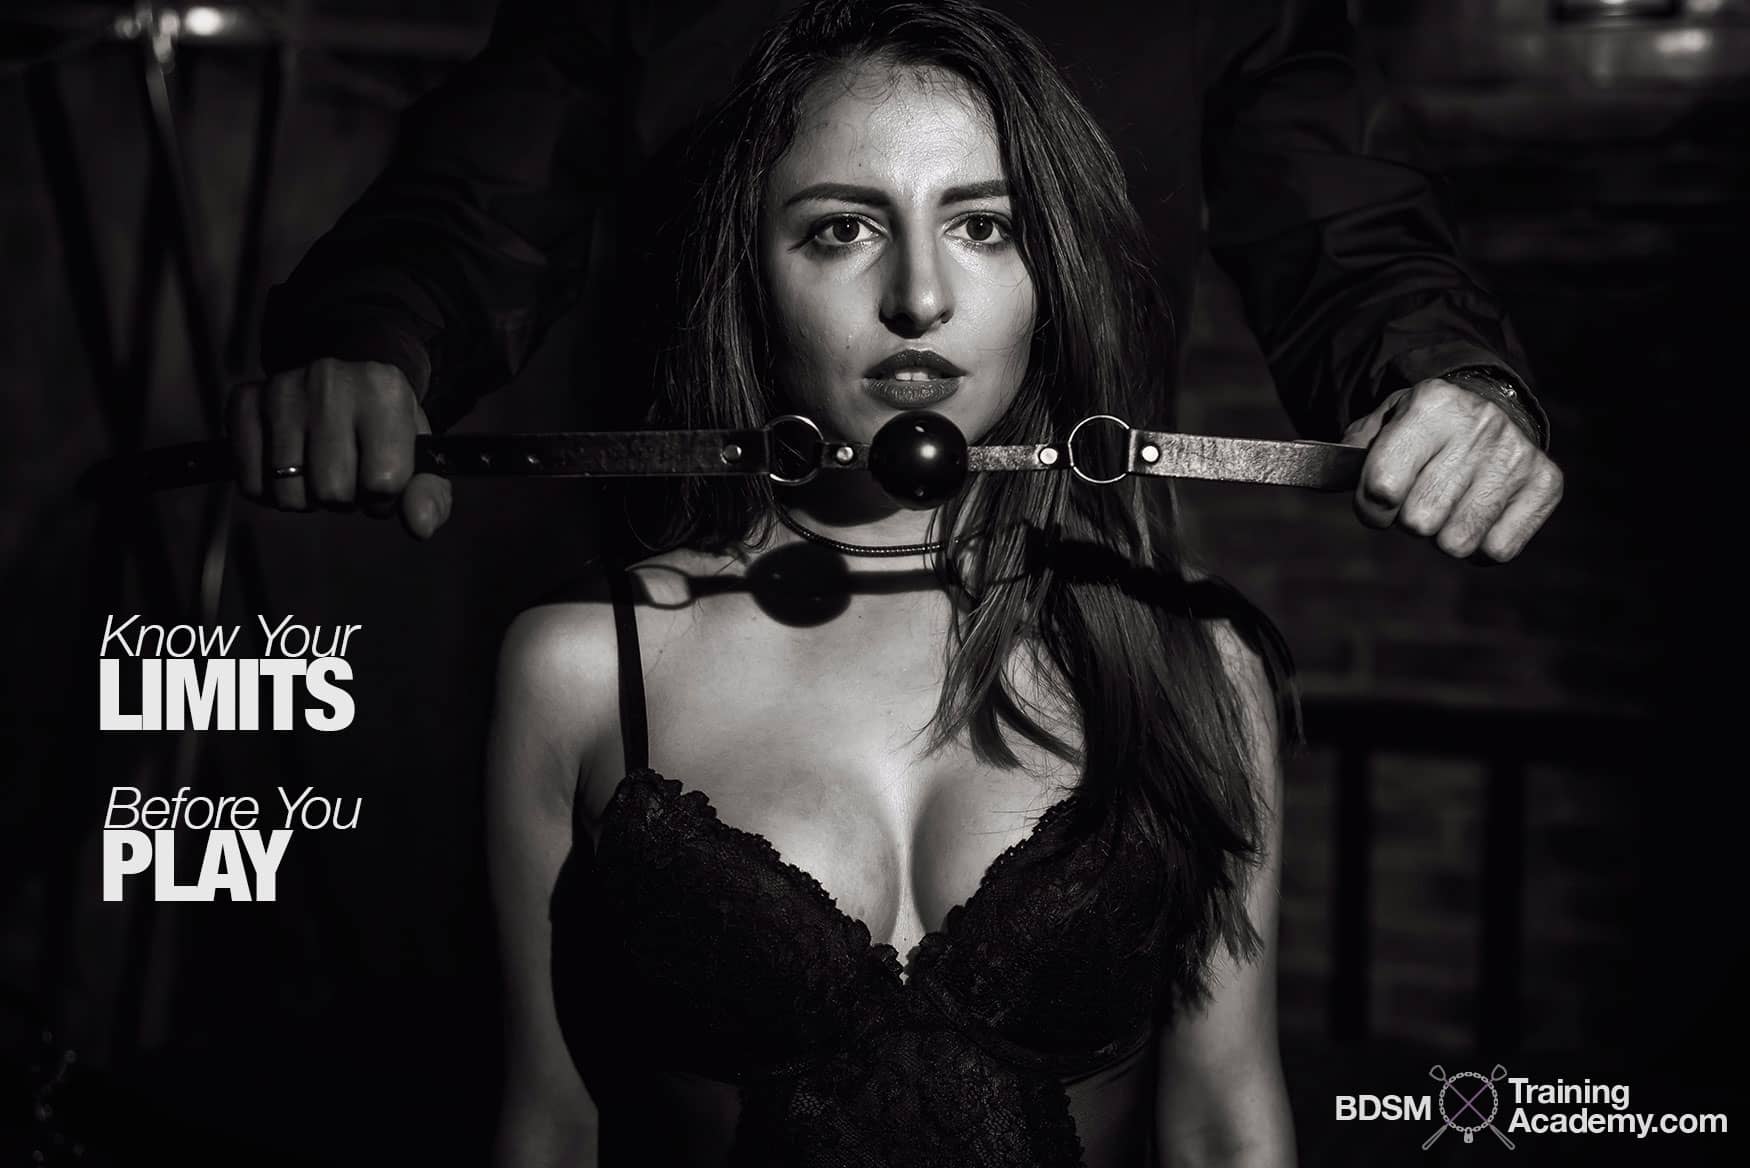 Know Your Boundaries In BDSM